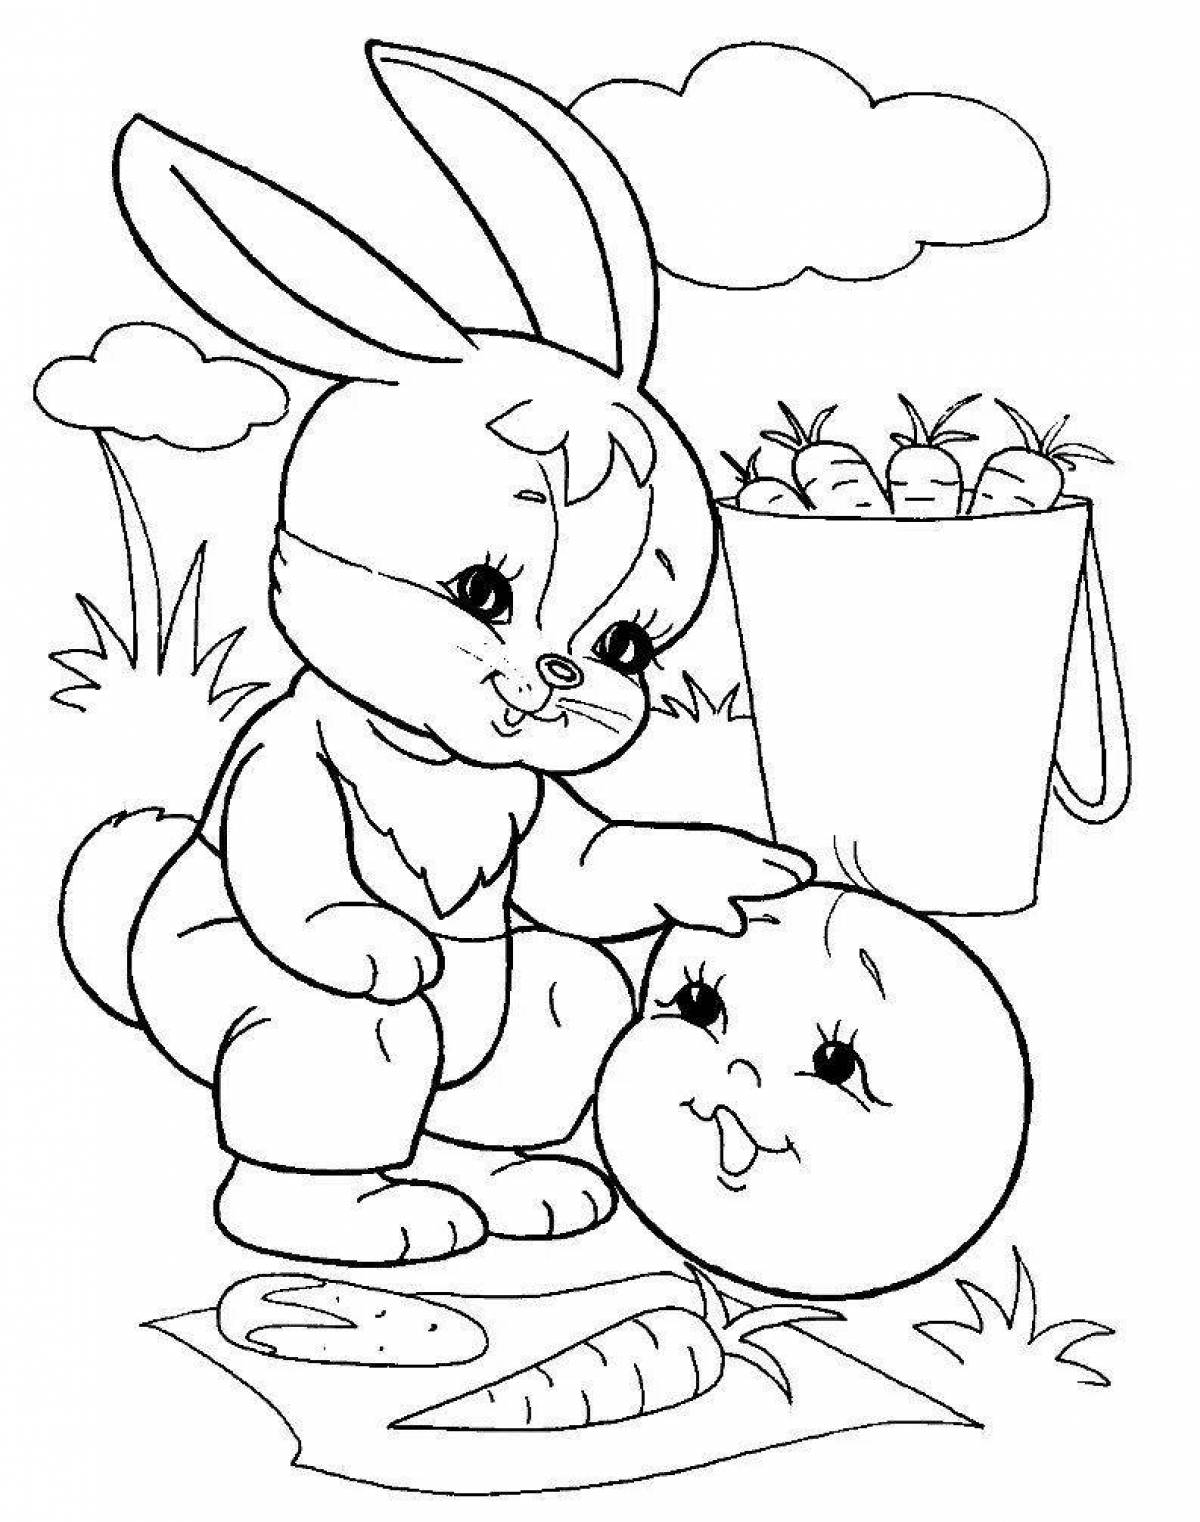 Sparkling Bunny and Bun coloring page